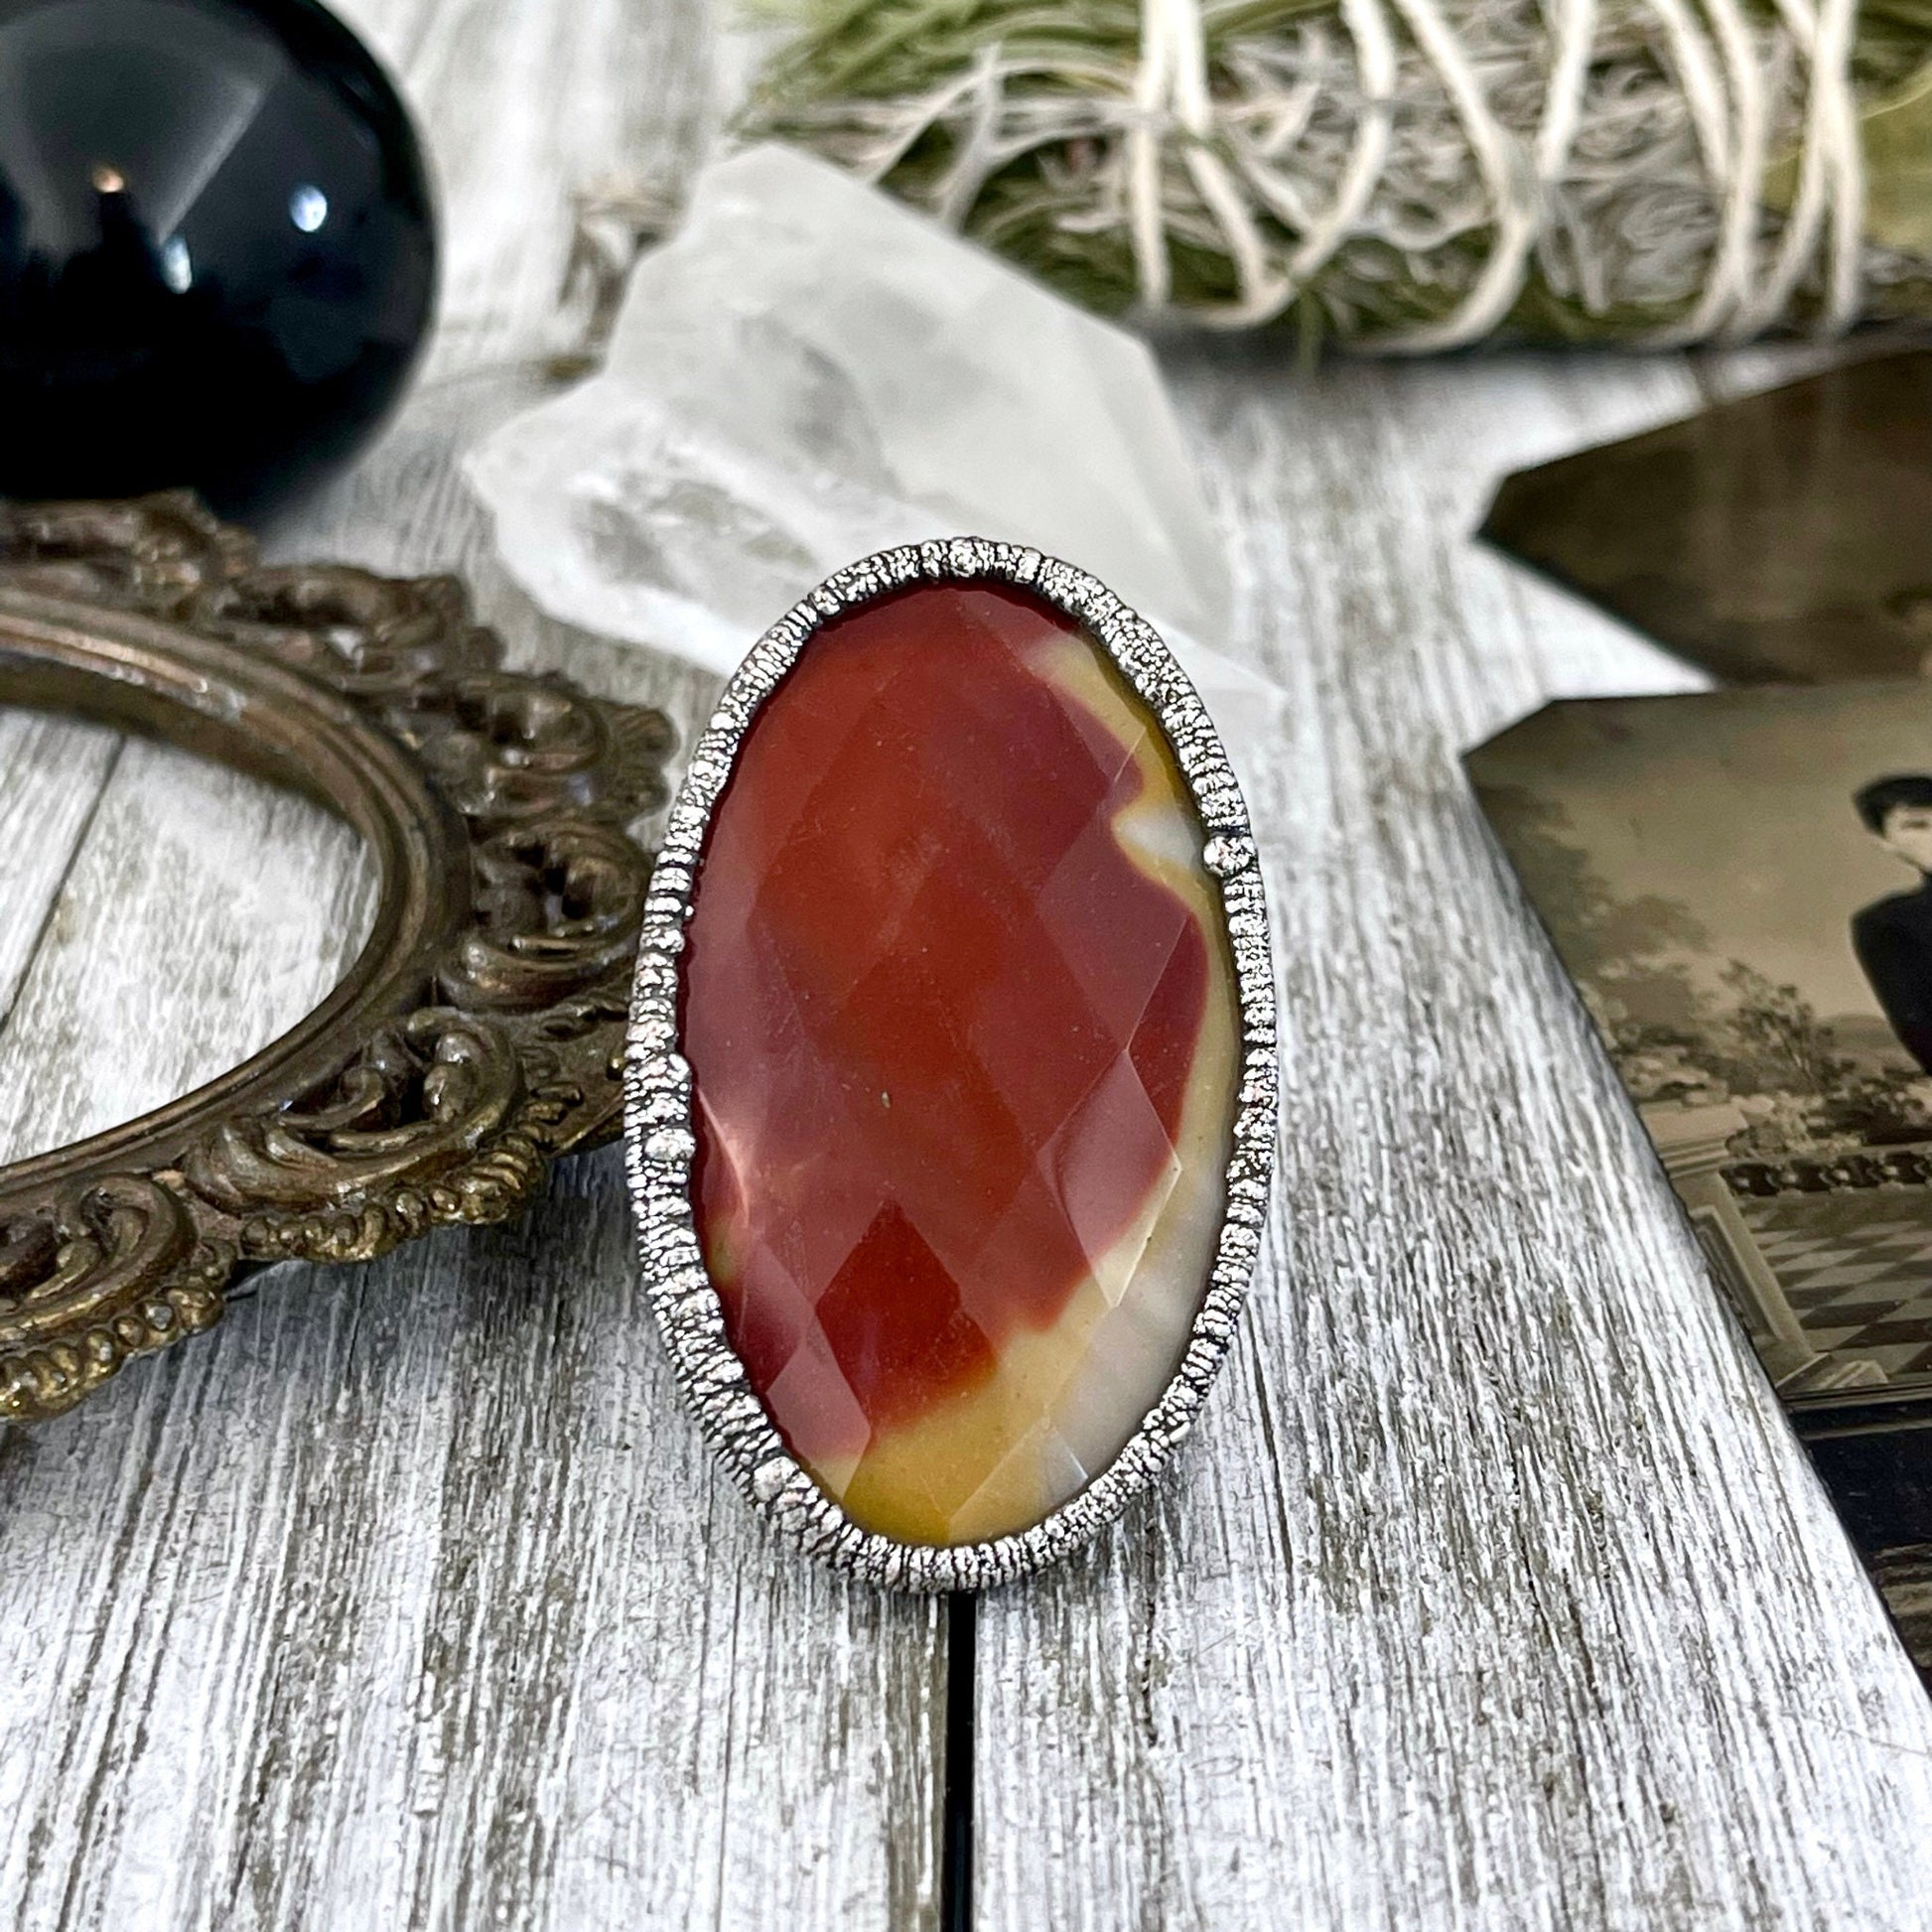 Big Bold Jewelry, Big Silver Ring, Bohemian Jewelry, Etsy ID: 1531387219, Foxlark Alchemy, FOXLARK- RINGS, Jewelry, large Stone Ring, Mookaite Ring, Red Stone Ring, Ring for Woman, Ring in Silver, Rings, Silver crystal ring, Silver stone ring, Statement J